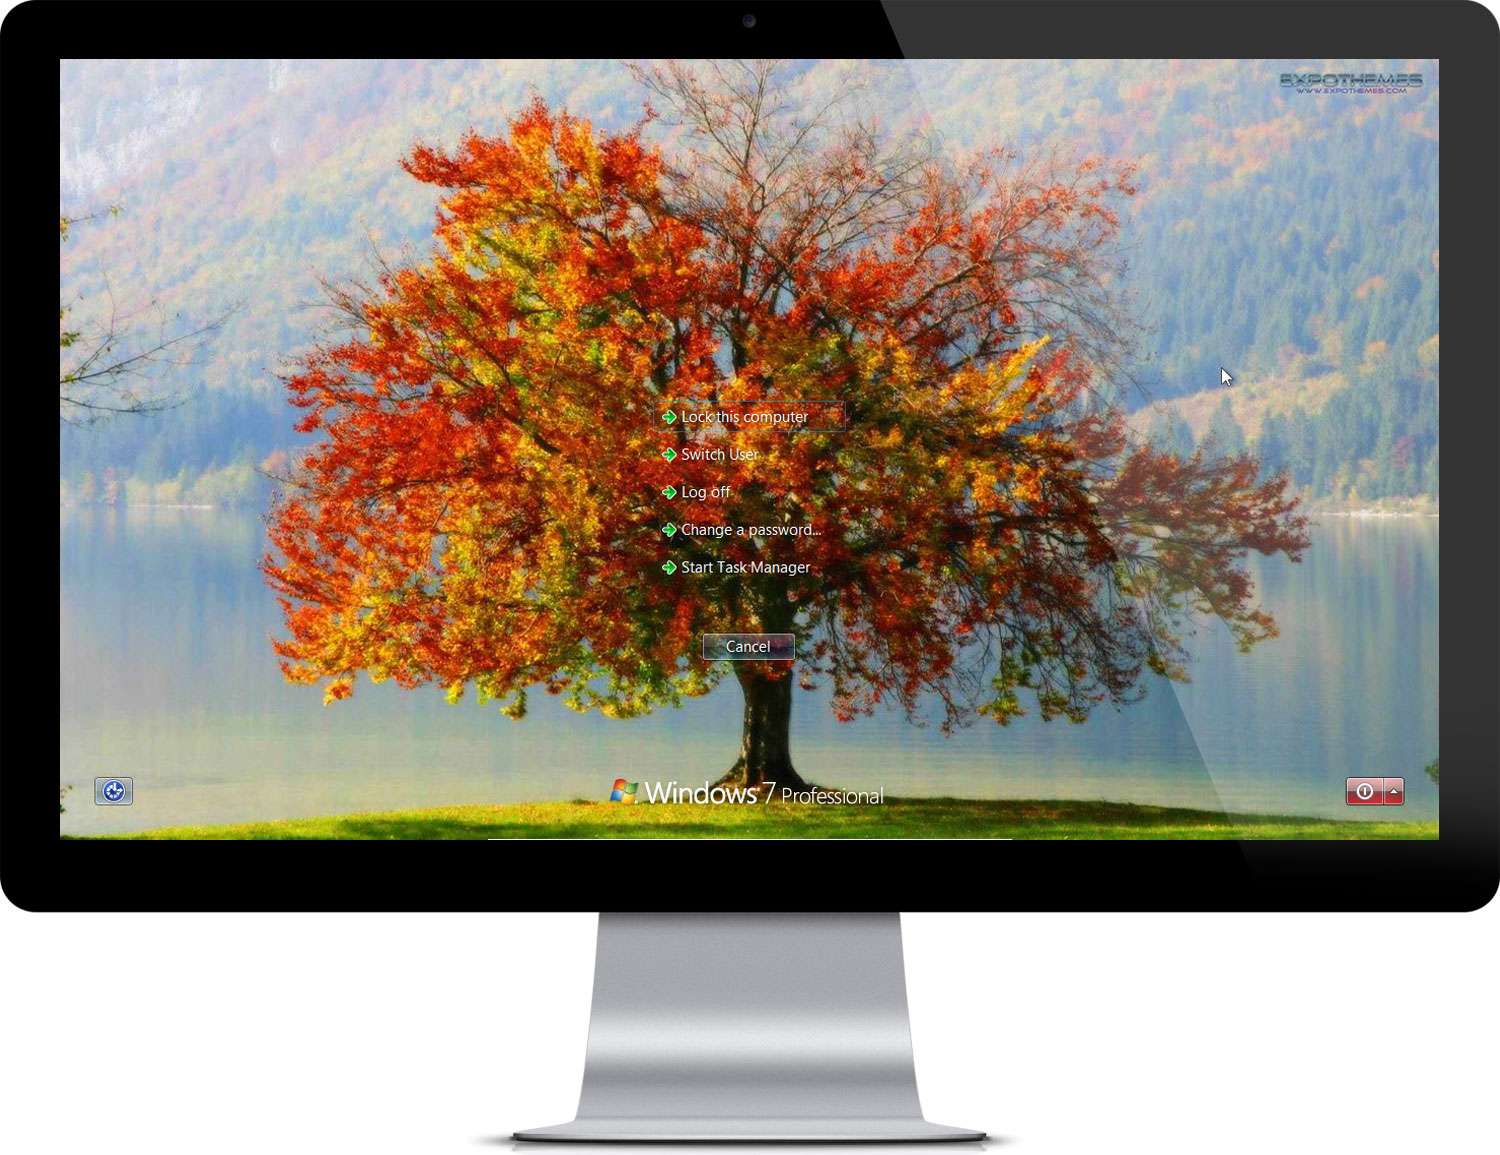 Autumn Wallpaper Theme For Windows And